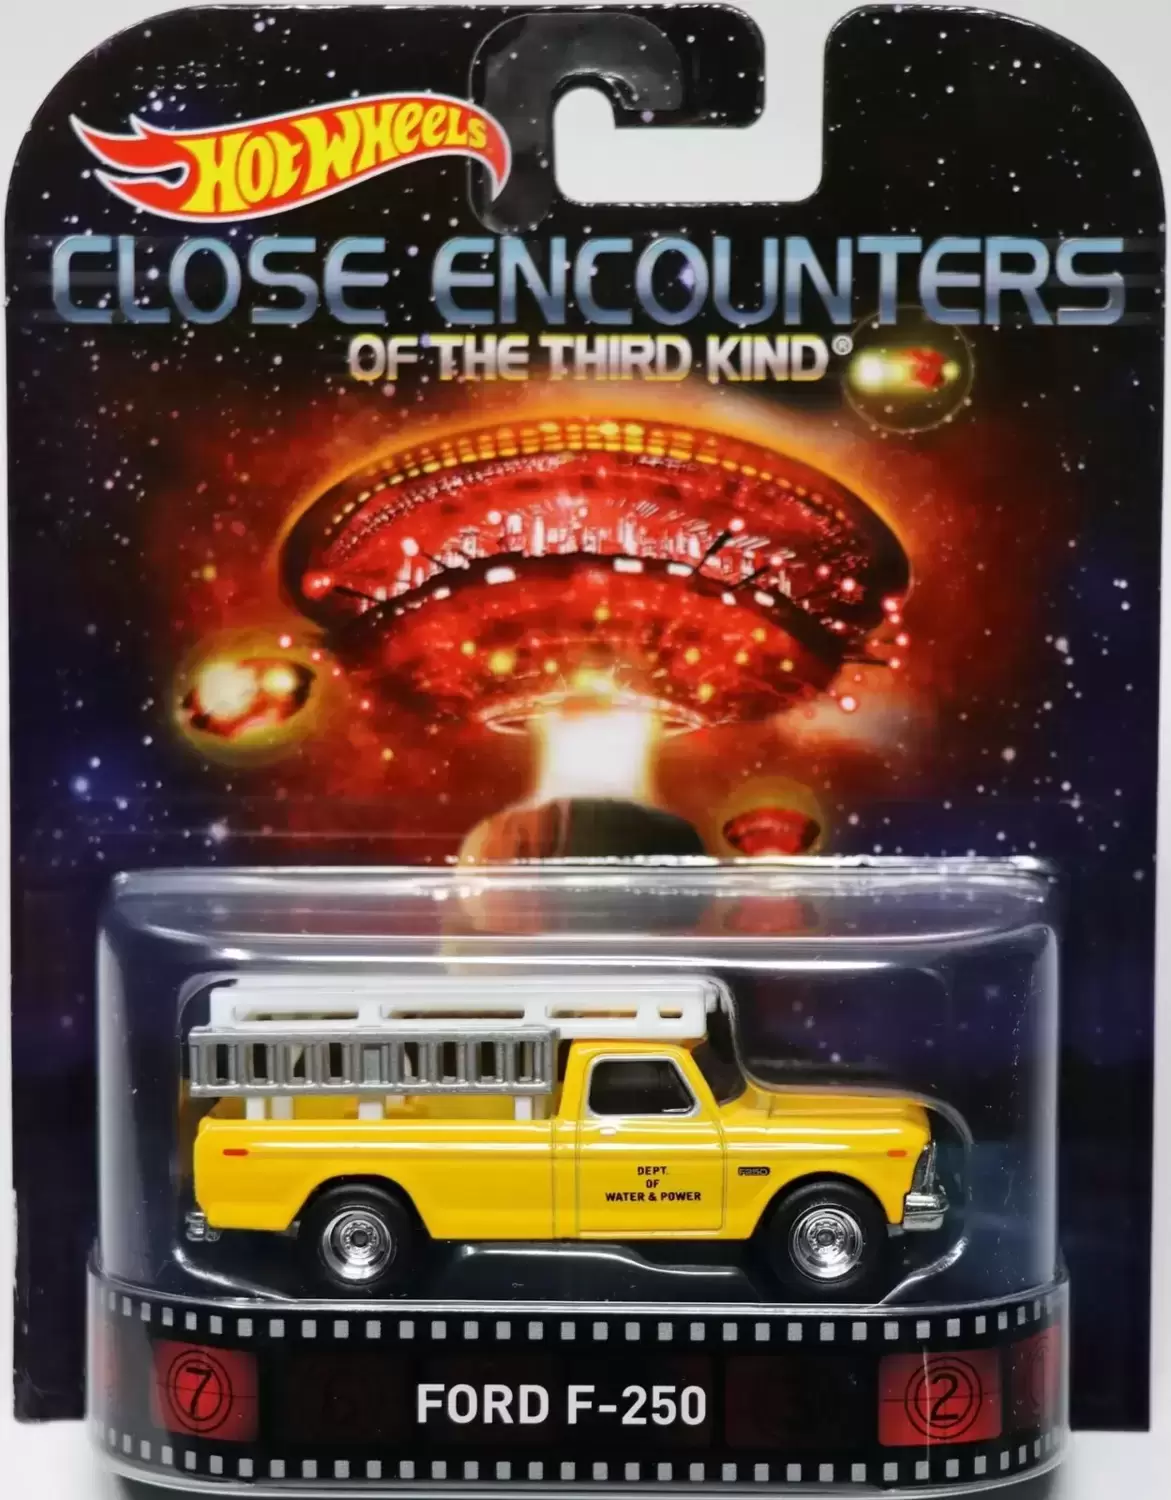 Retro Entertainment Hot Wheels - Close Encounters of the Third Kind - Ford F-250